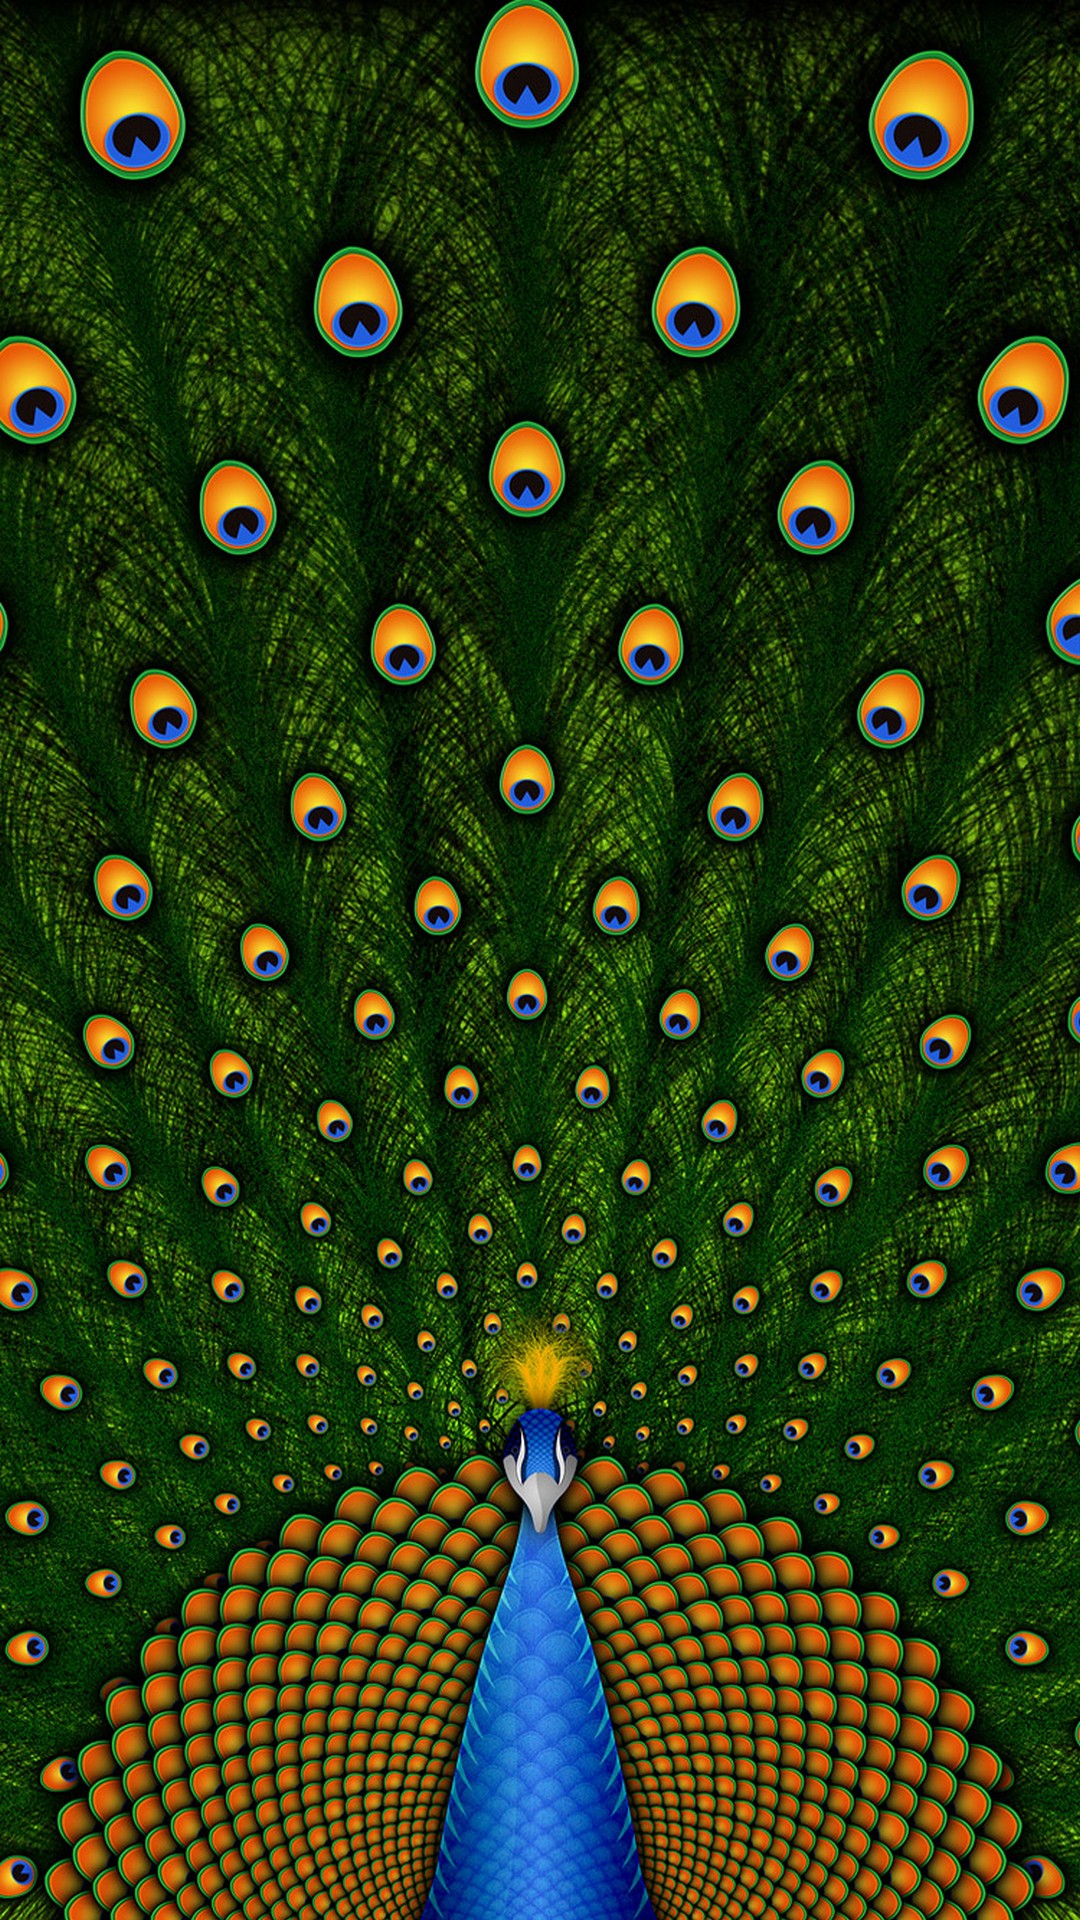 Peacock Cute Girly Wallpaper For iPhone 1080x1920